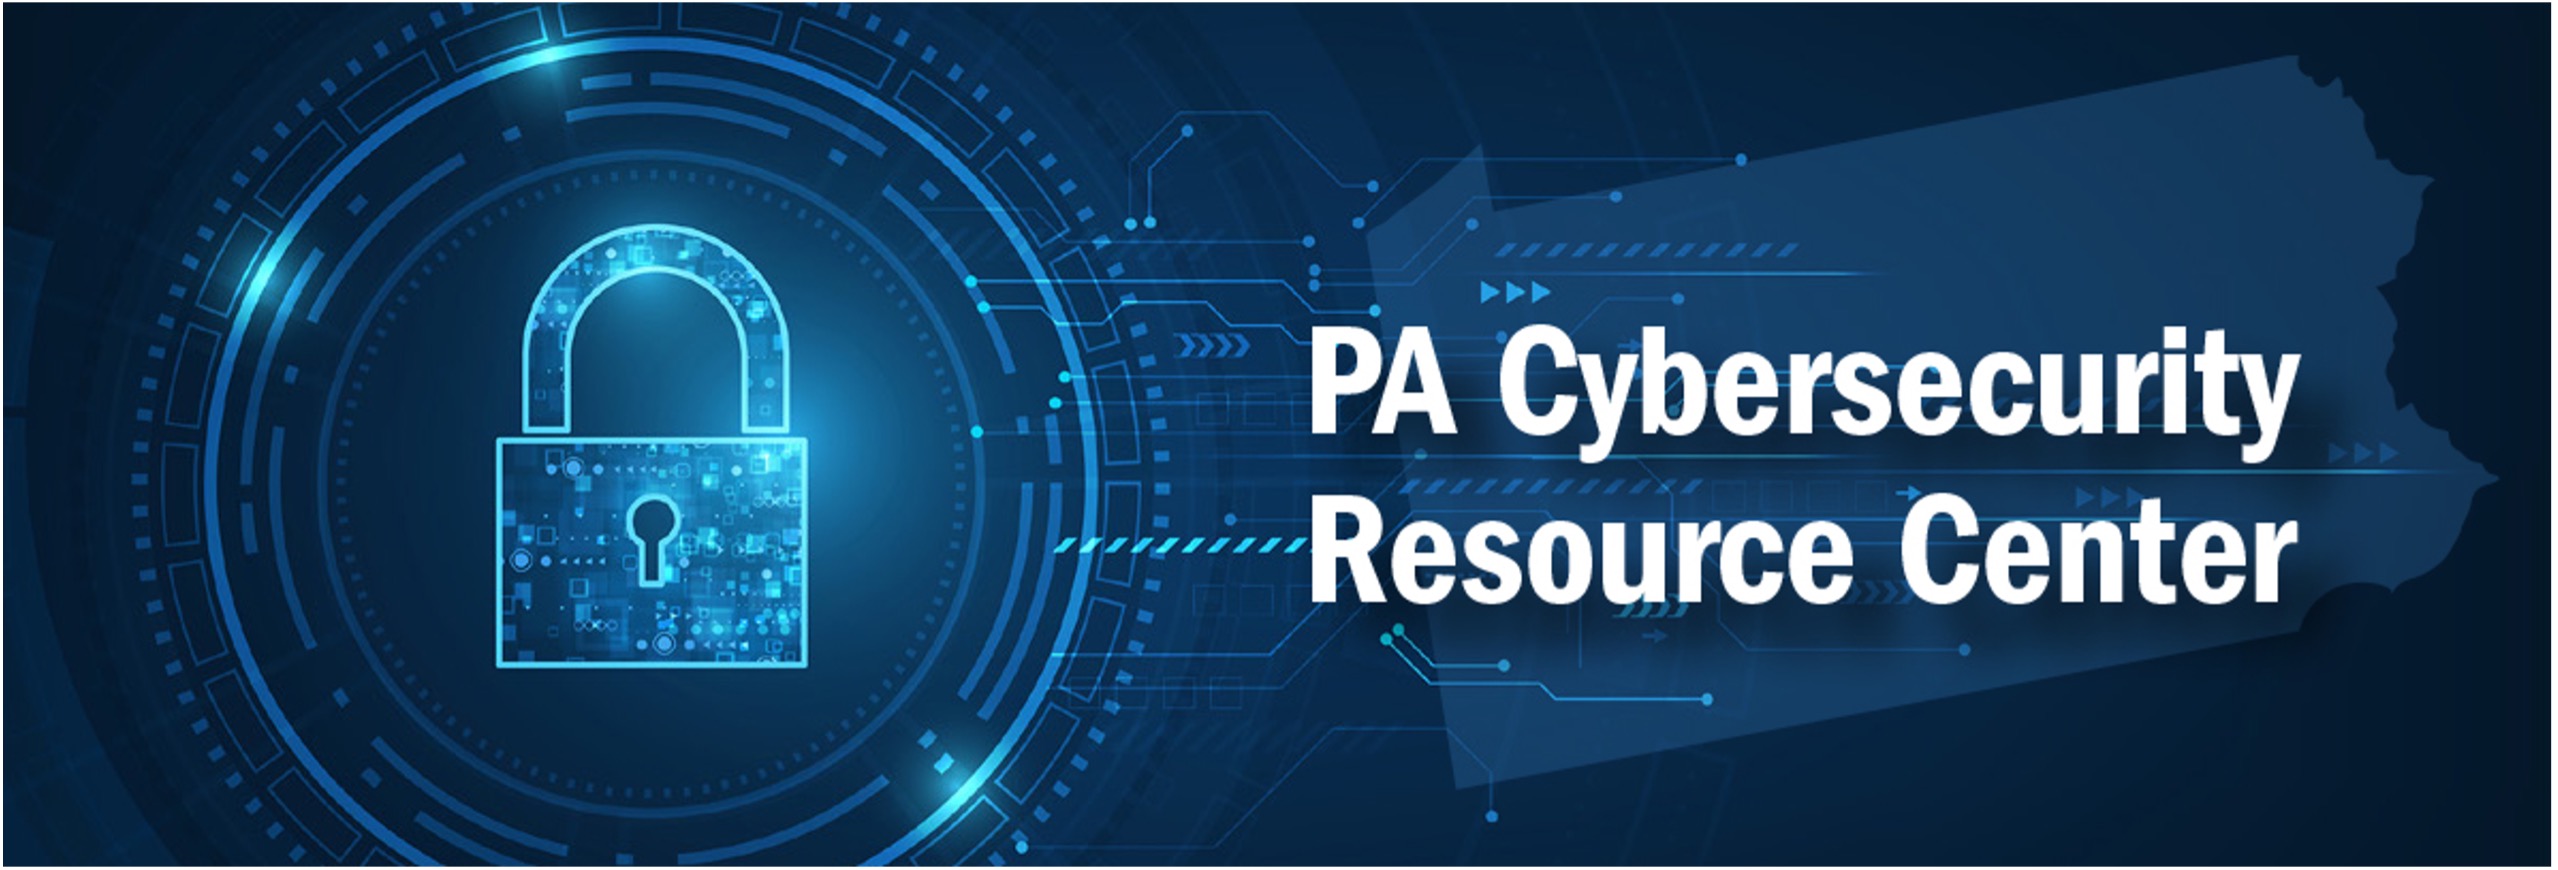 PA Cybersecurity Resource Center